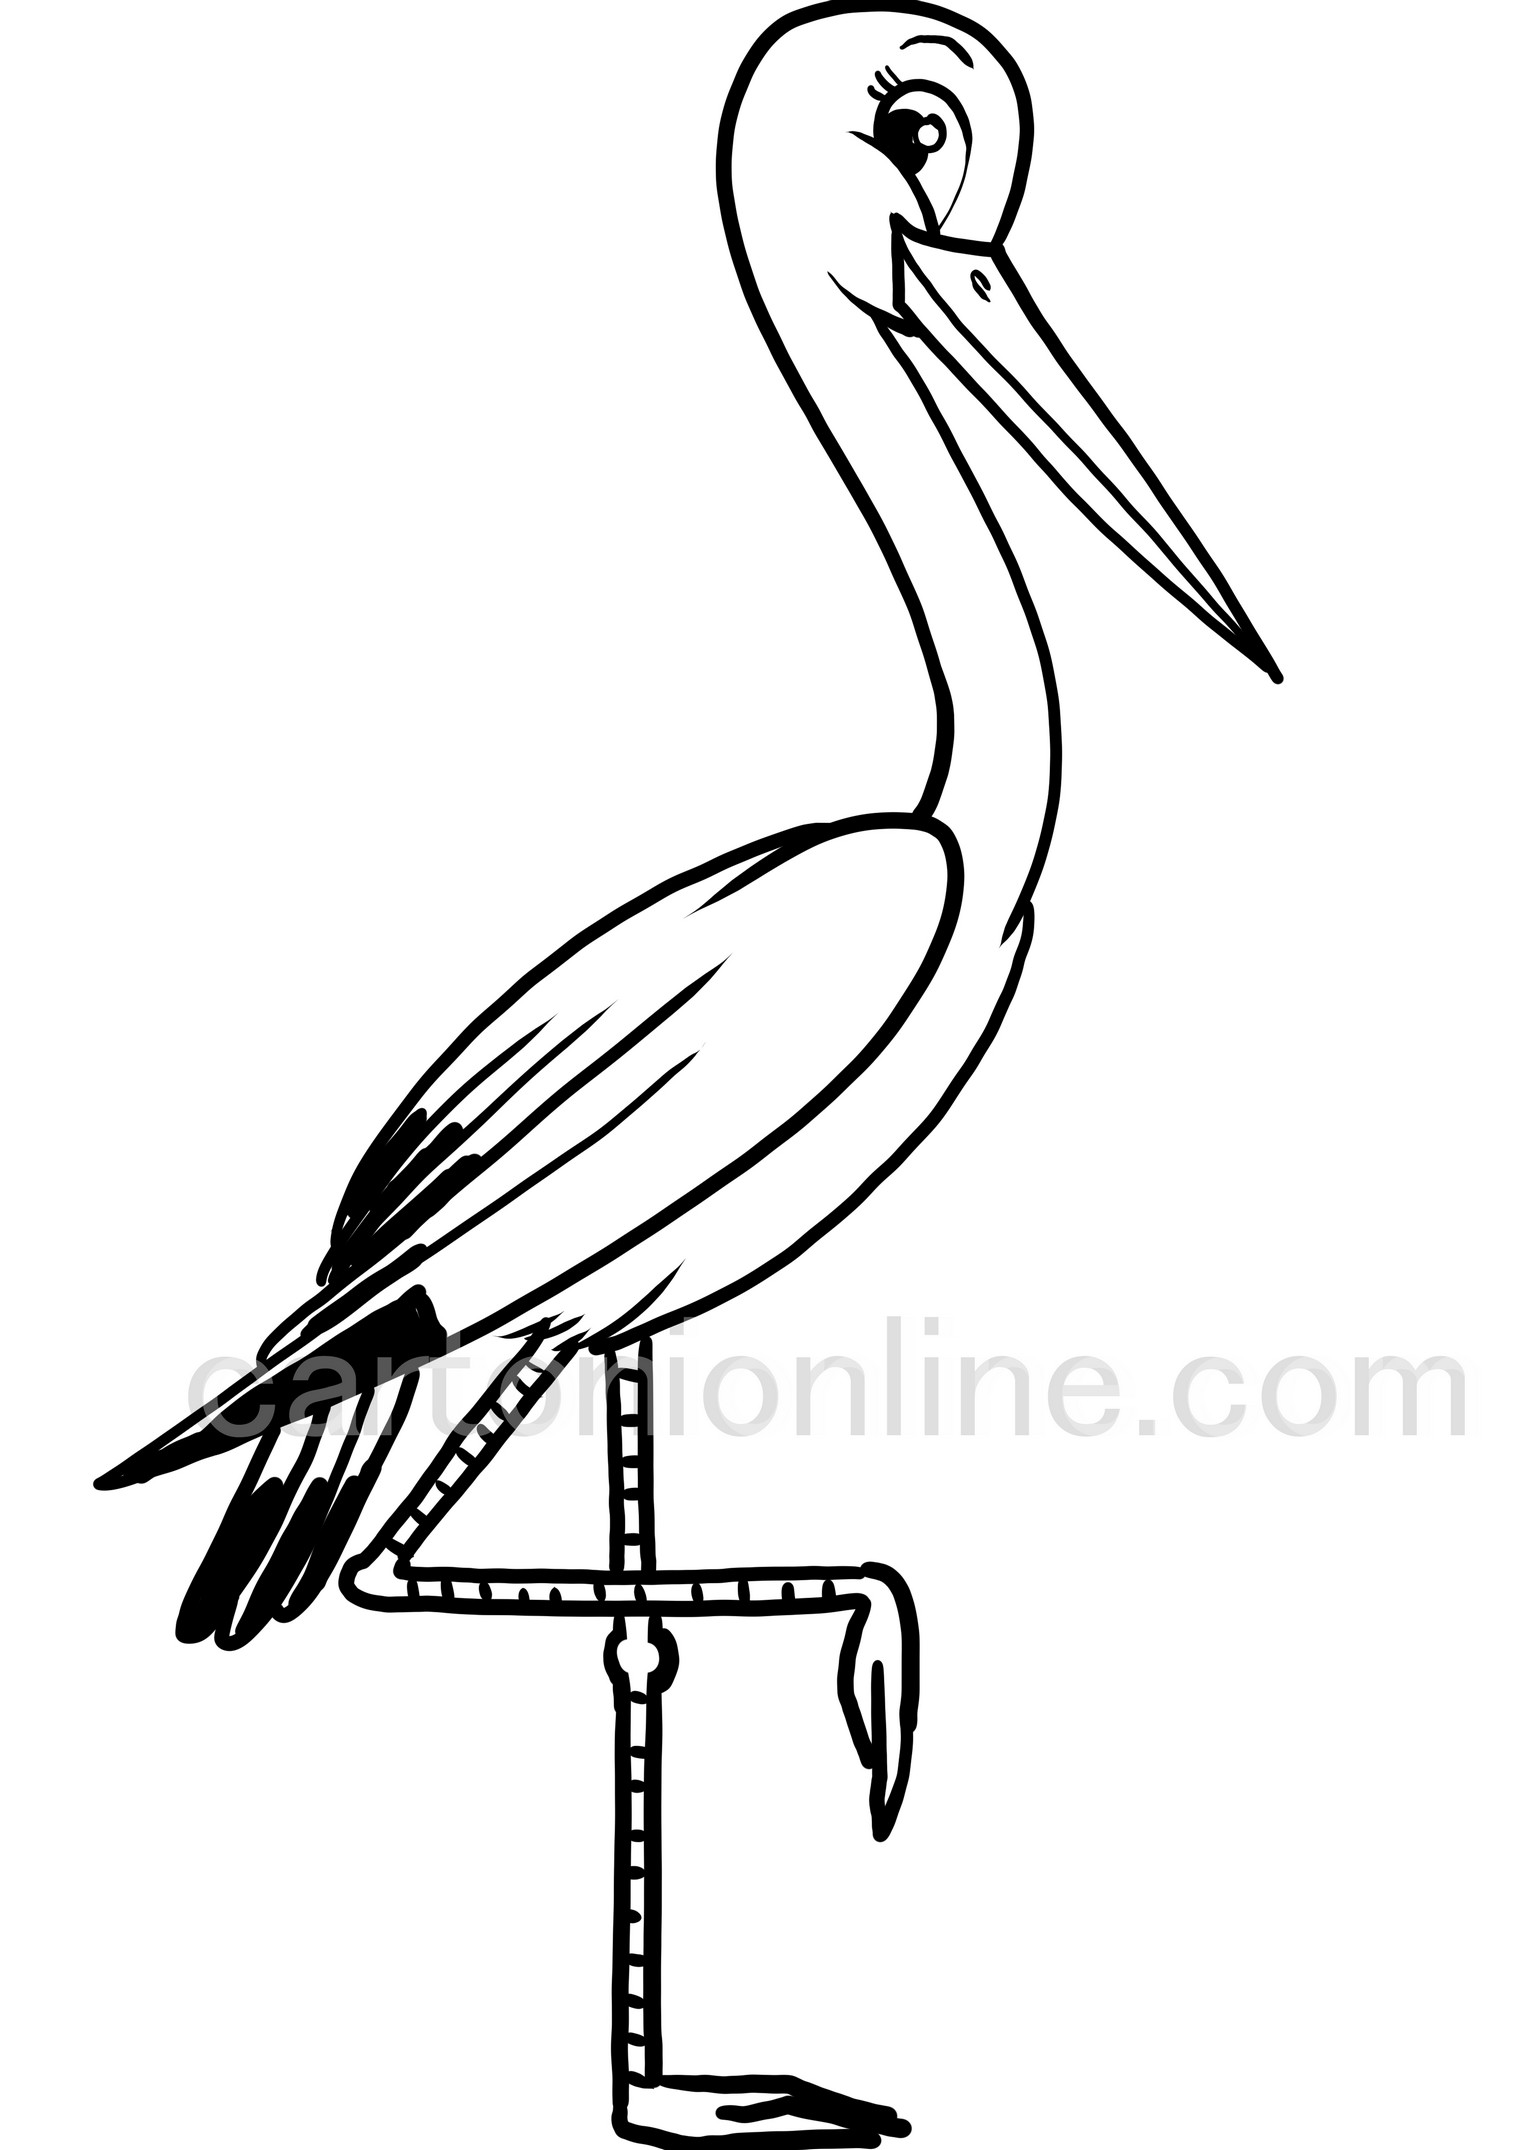 Cartoon style stork coloring page